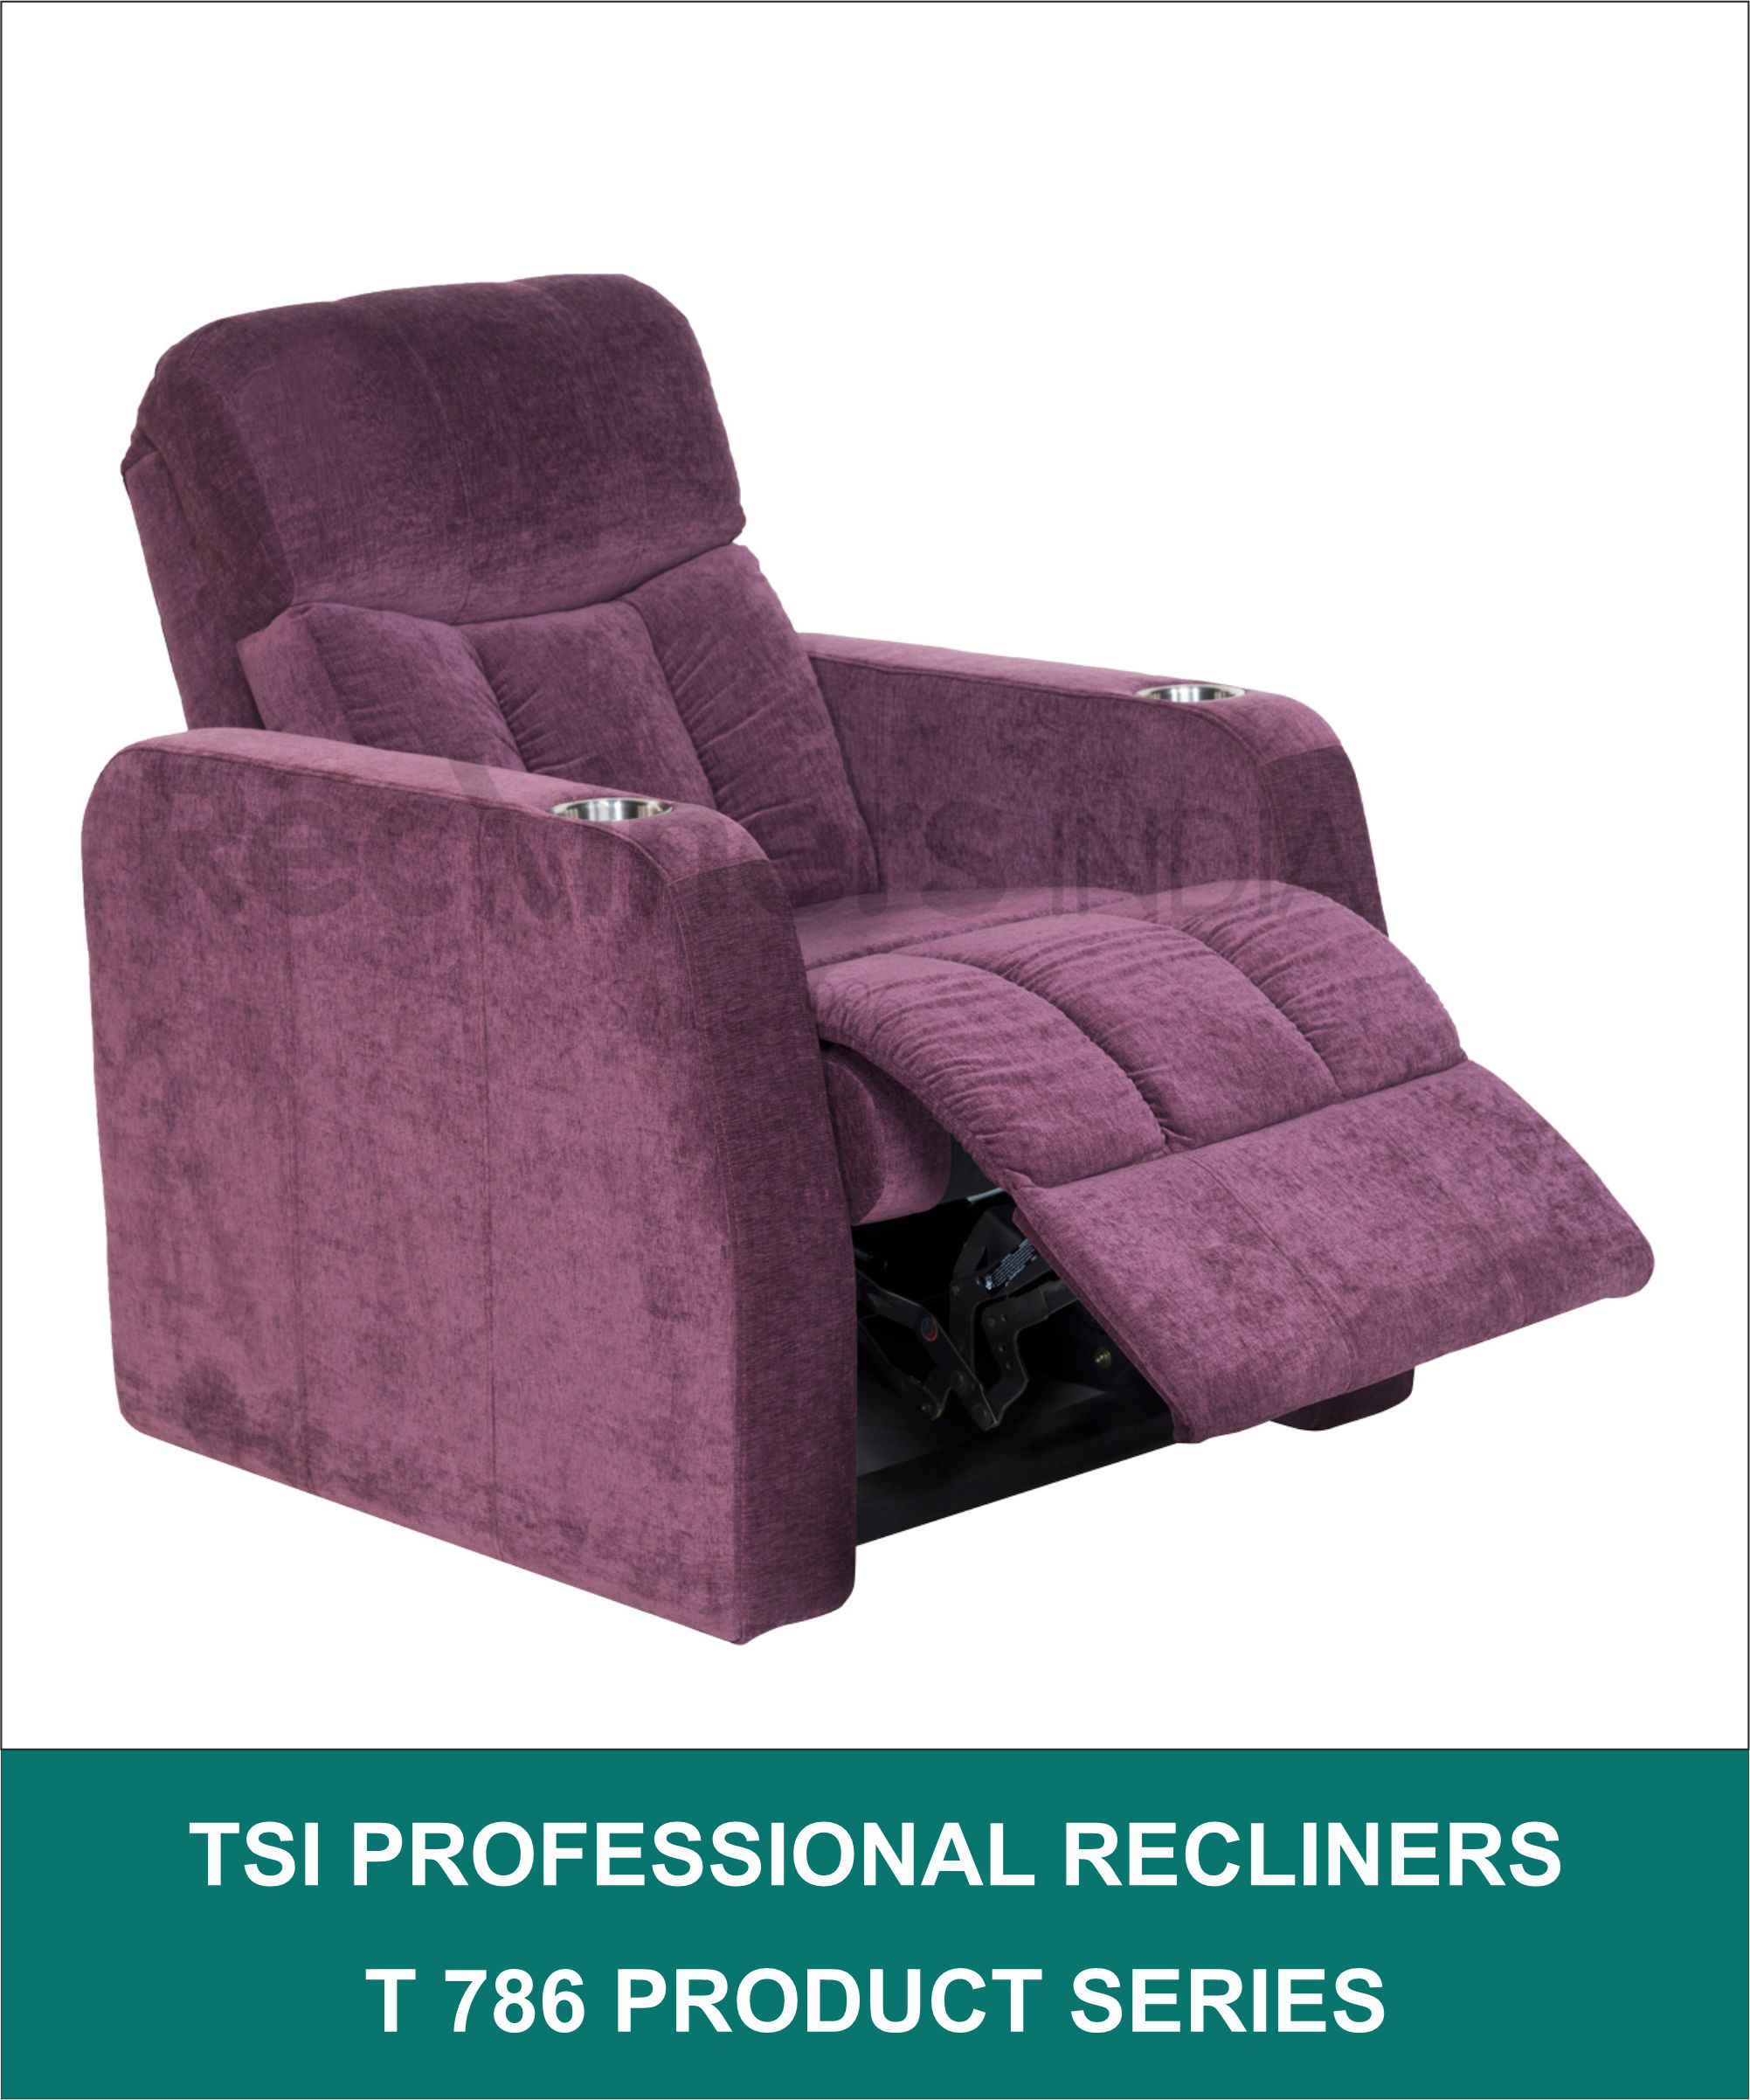 Recliners – Top Product Category